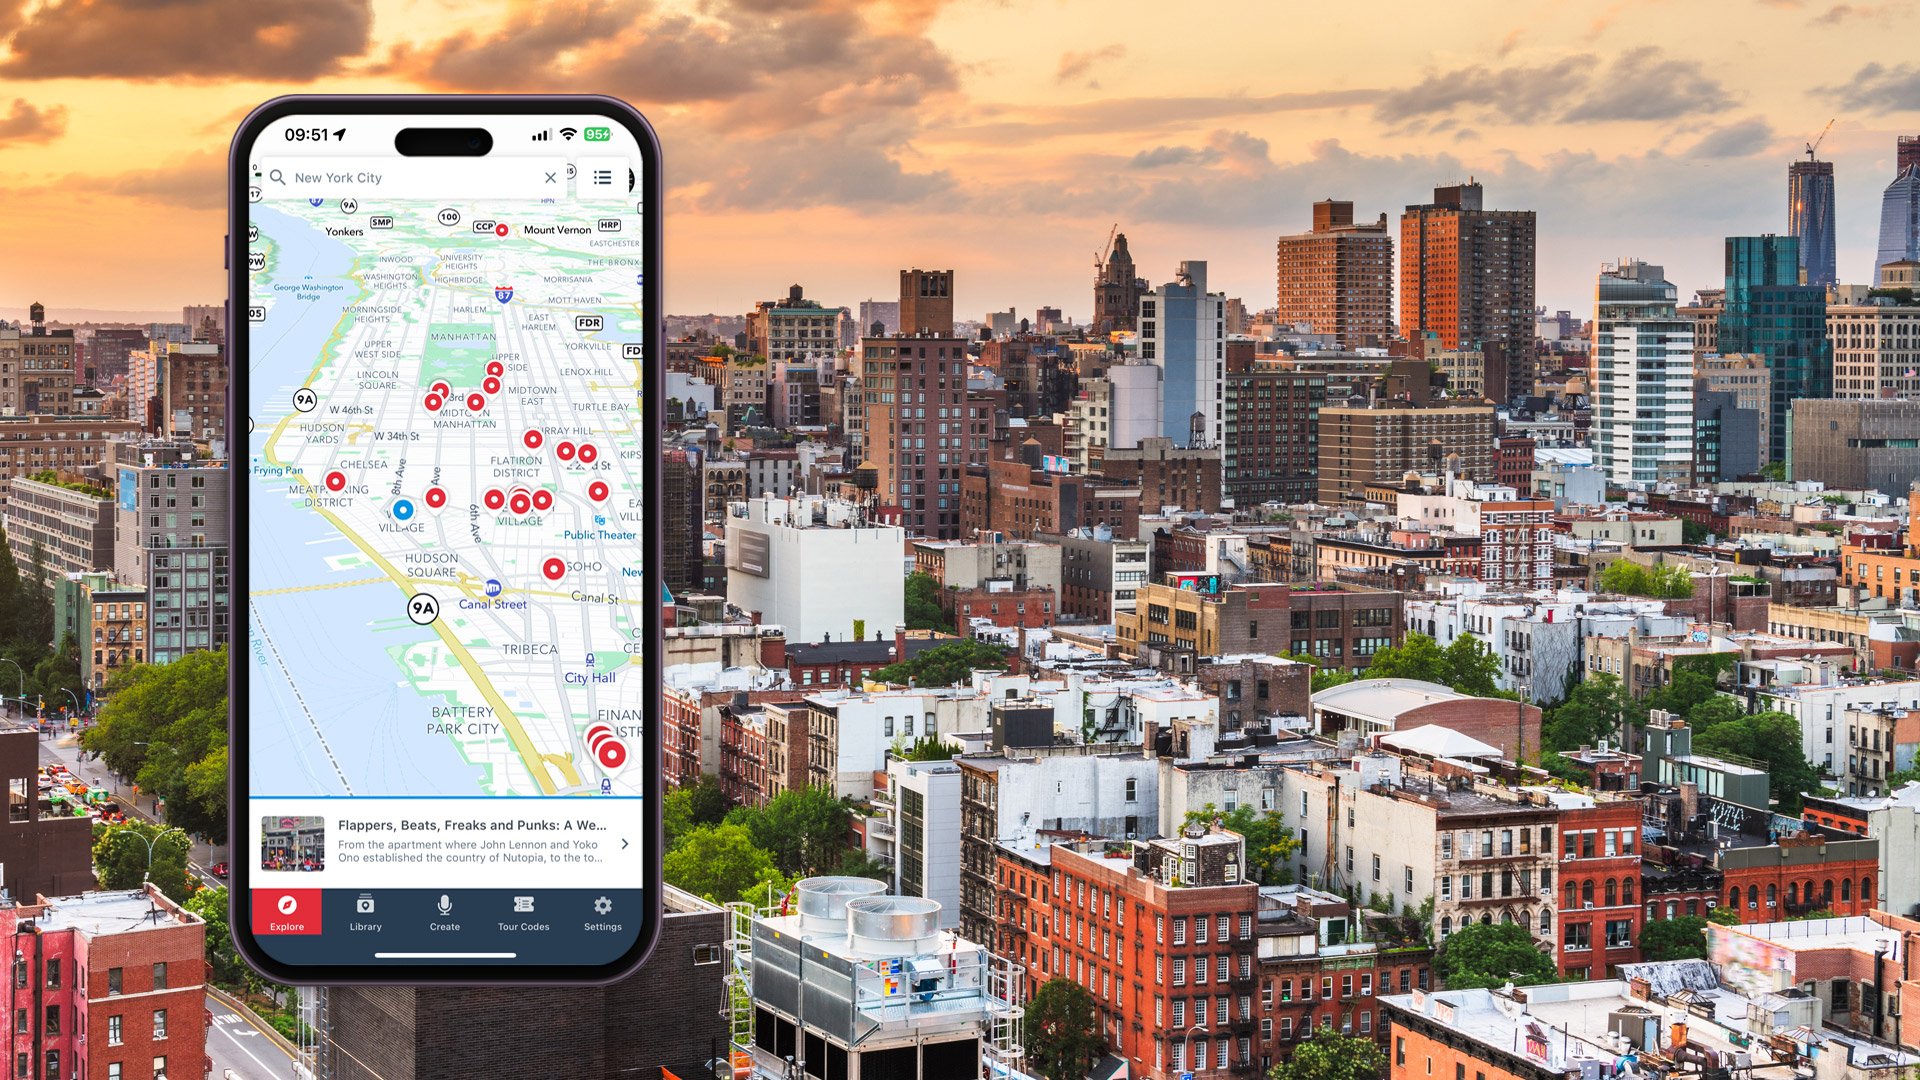 The best self-guided audio tour apps for New York City 